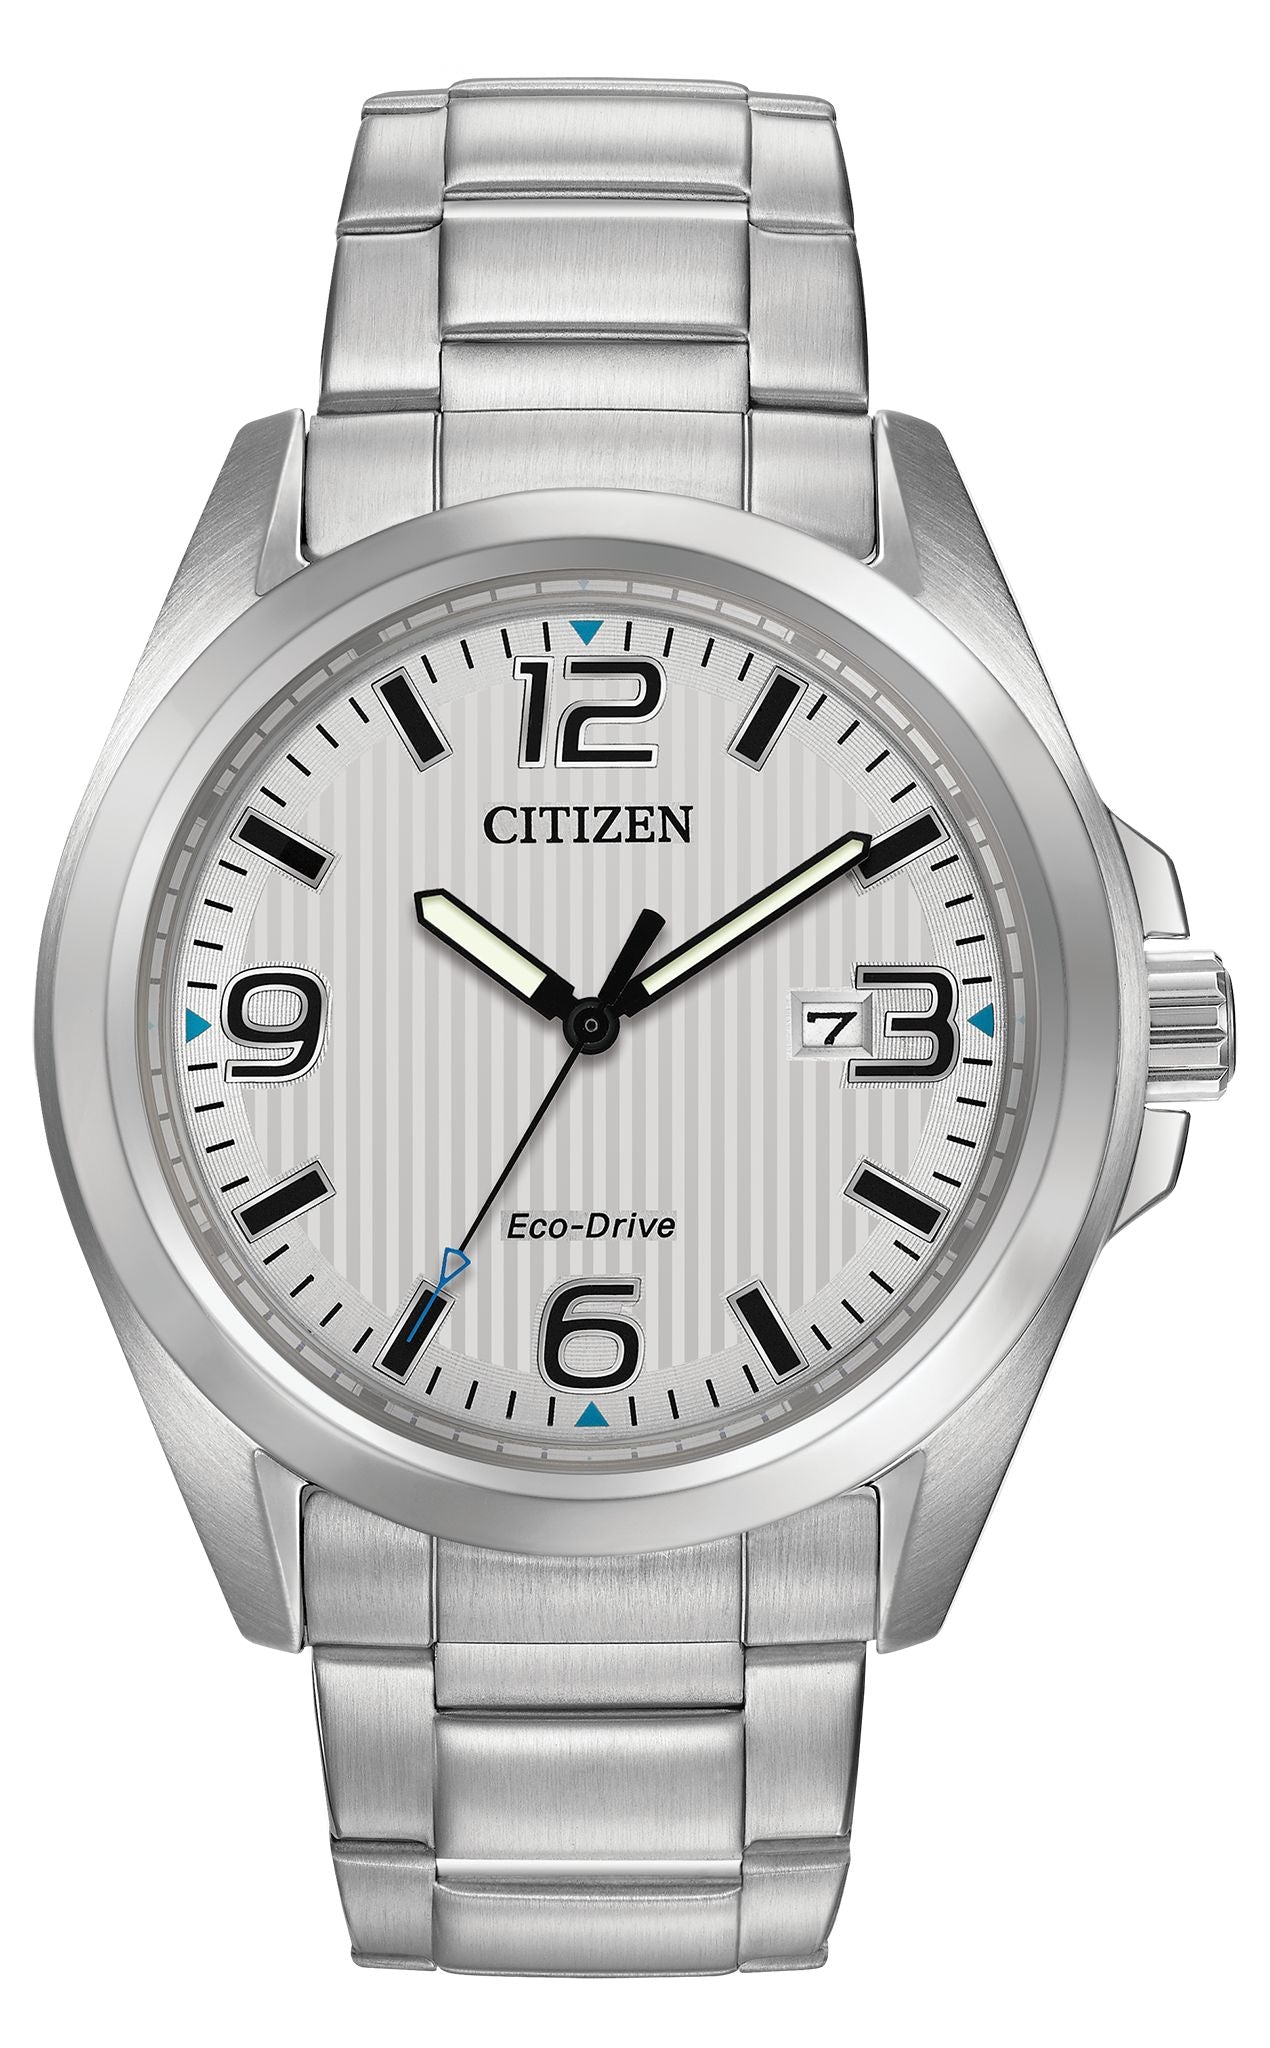 Men's Classic Citizen Watch with Bold Dial Numbers